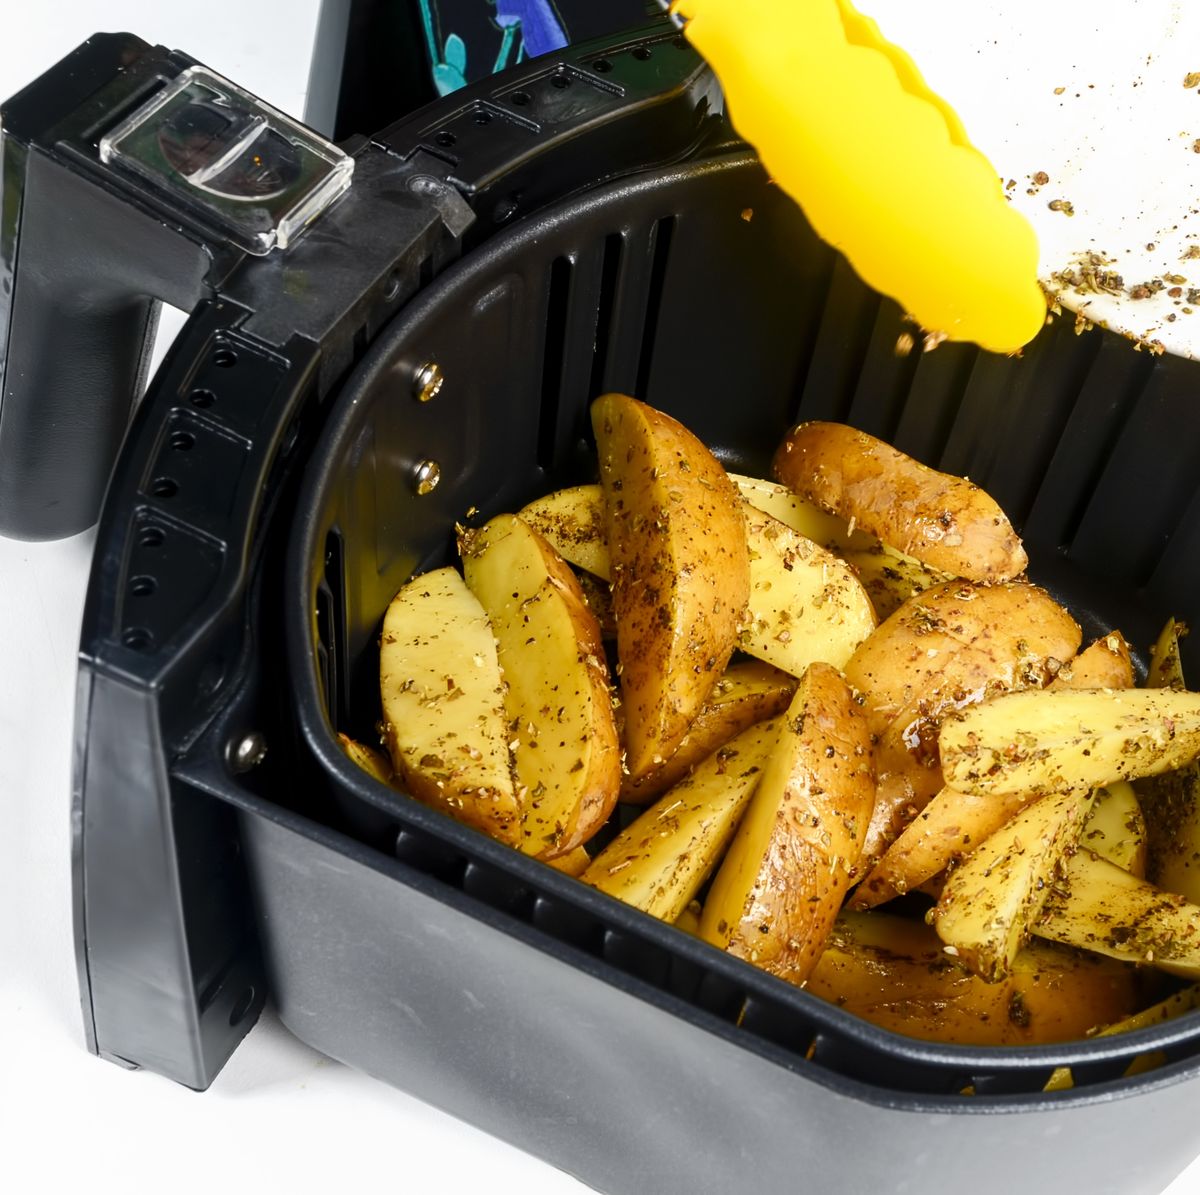 https://hips.hearstapps.com/hmg-prod/images/air-fryer-grill-potato-at-home-isolated-on-white-royalty-free-image-1640714864.jpg?crop=0.665xw:1.00xh;0.0385xw,0&resize=1200:*